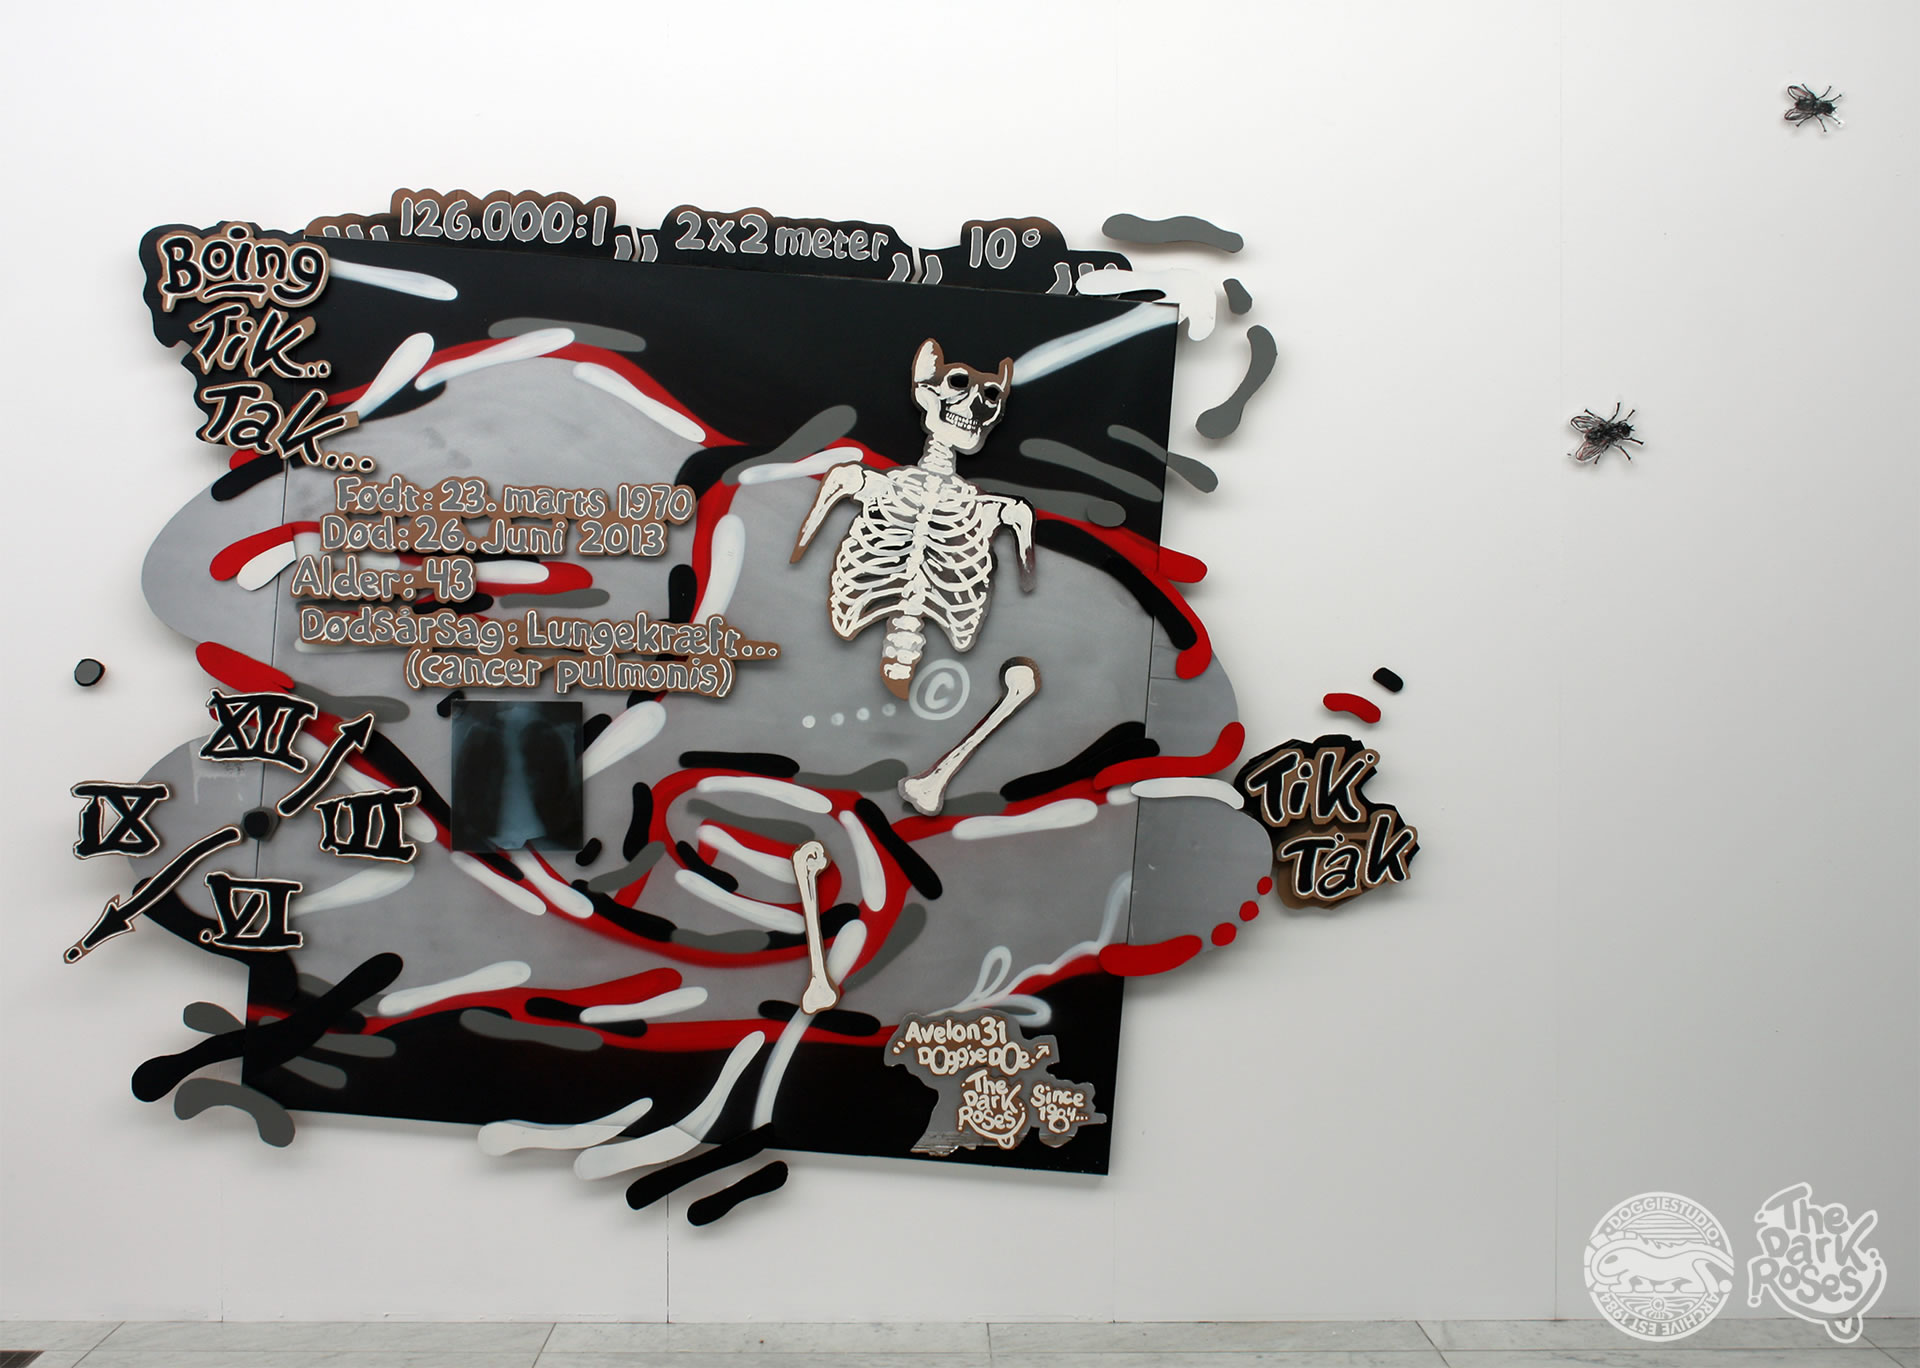 ★ 2x2m 10 degree ★ 200X200 cm. X-ray of lungs. Acrylic, ink and spraypaint on canvas and cardboard by Avelon 31 and DoggieDoe - The Dark Roses - Kunsten, Aalborg Museum, Denmark 20. March 2013